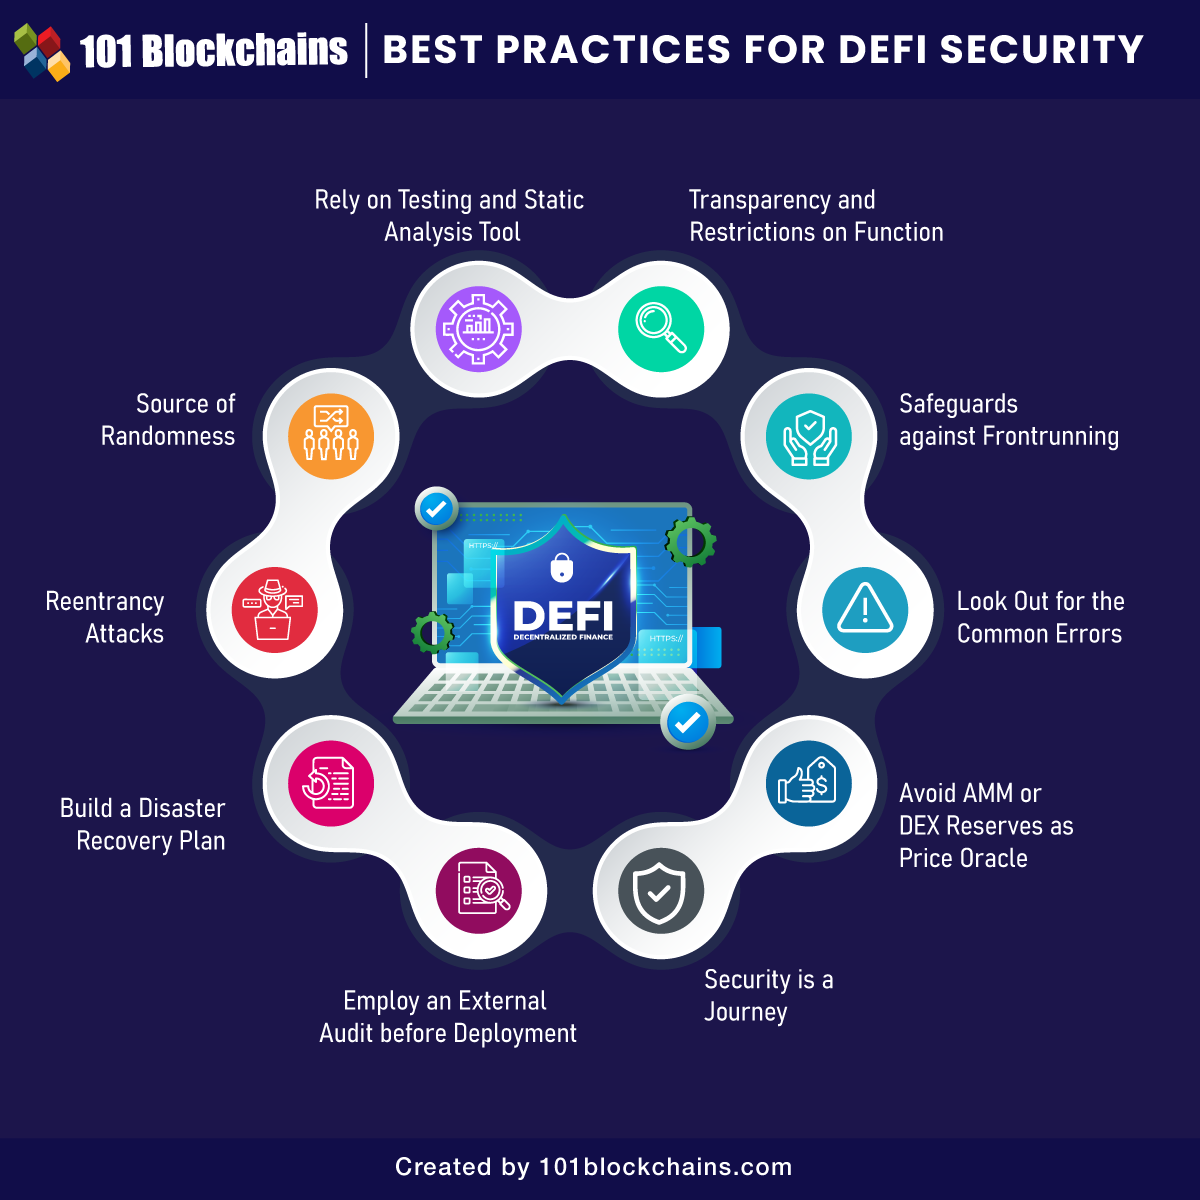 Best Practices for DeFi Security